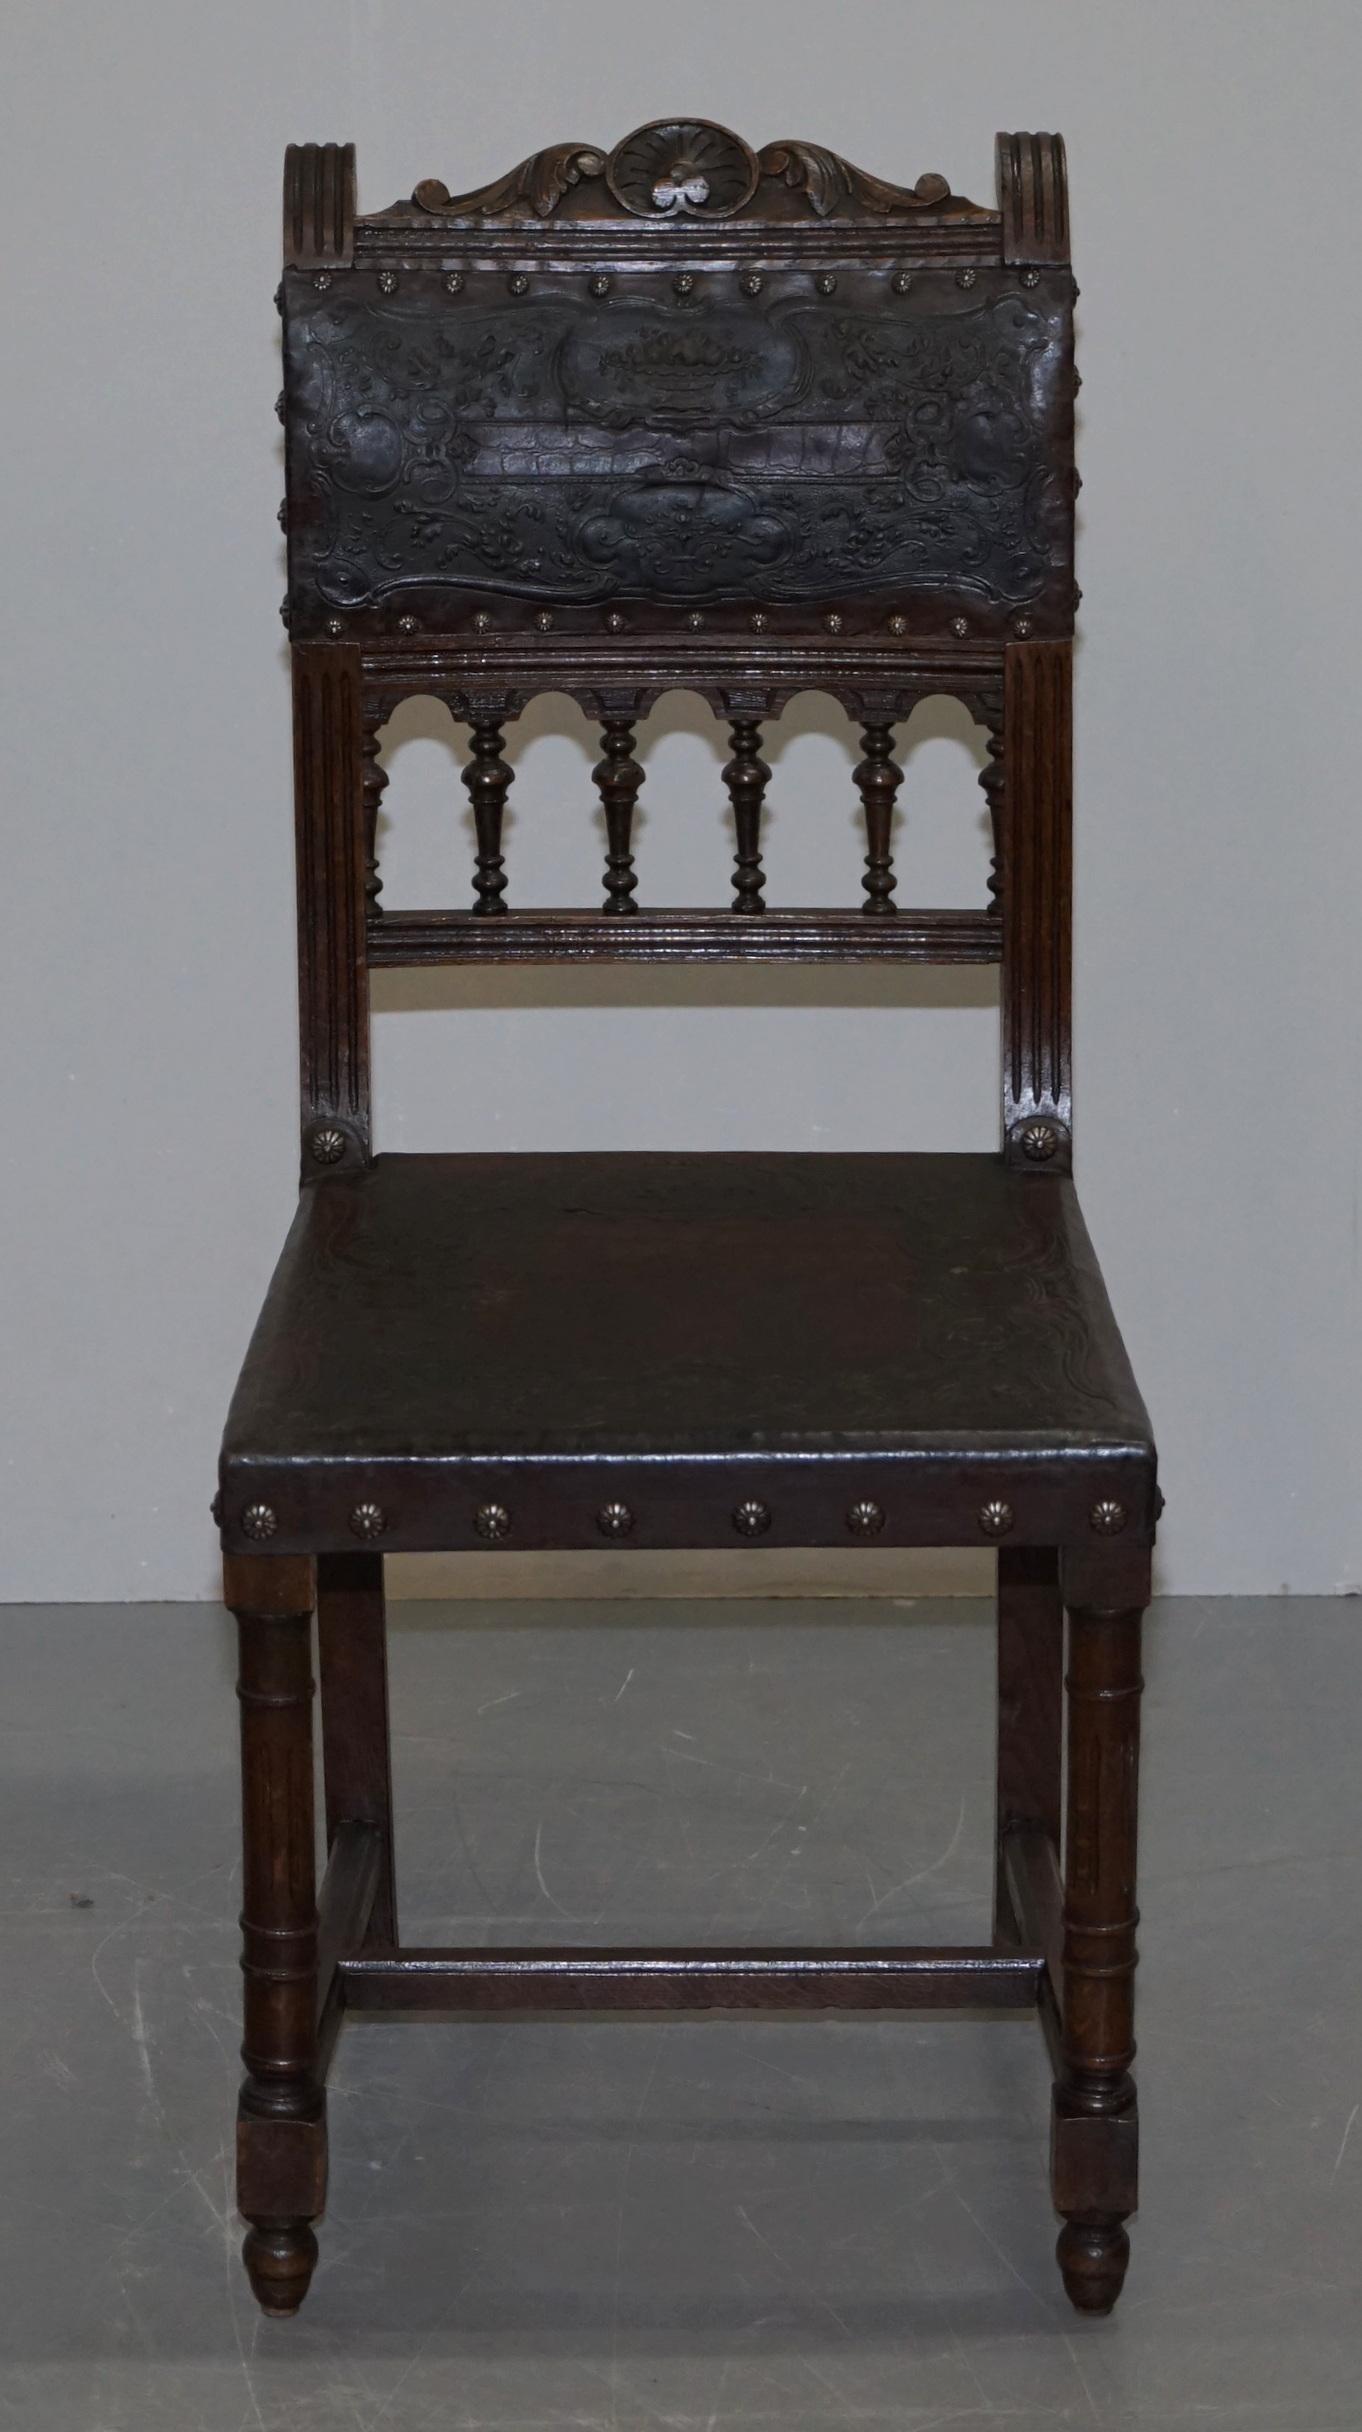 henry the 8th chair